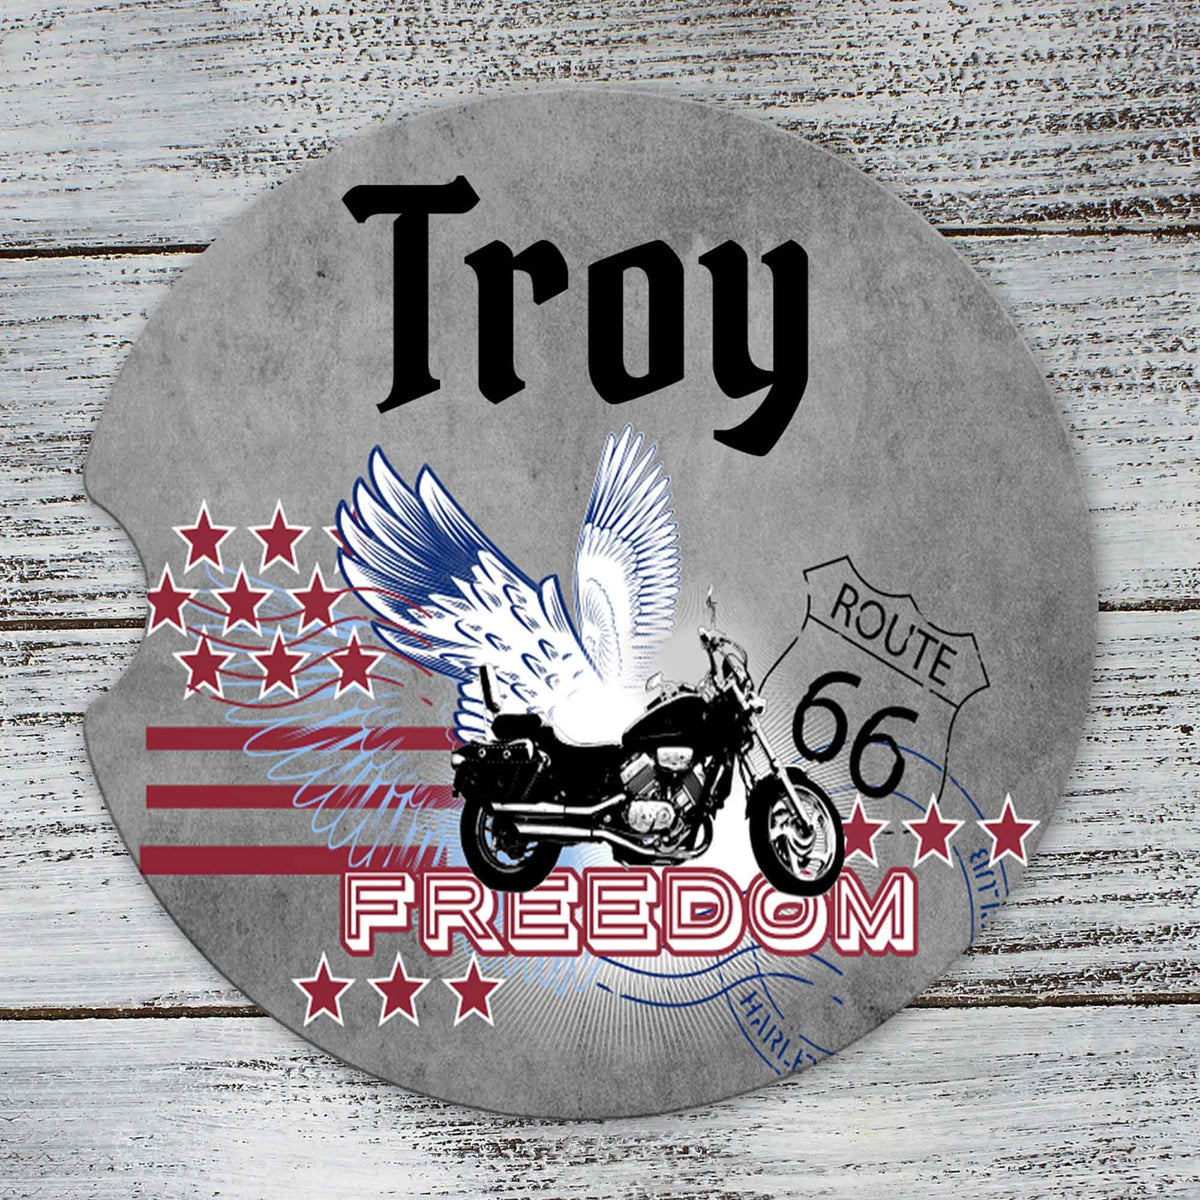 Personalized Car Coasters | Custom Car Accessories | Motorcycle | Set of 2